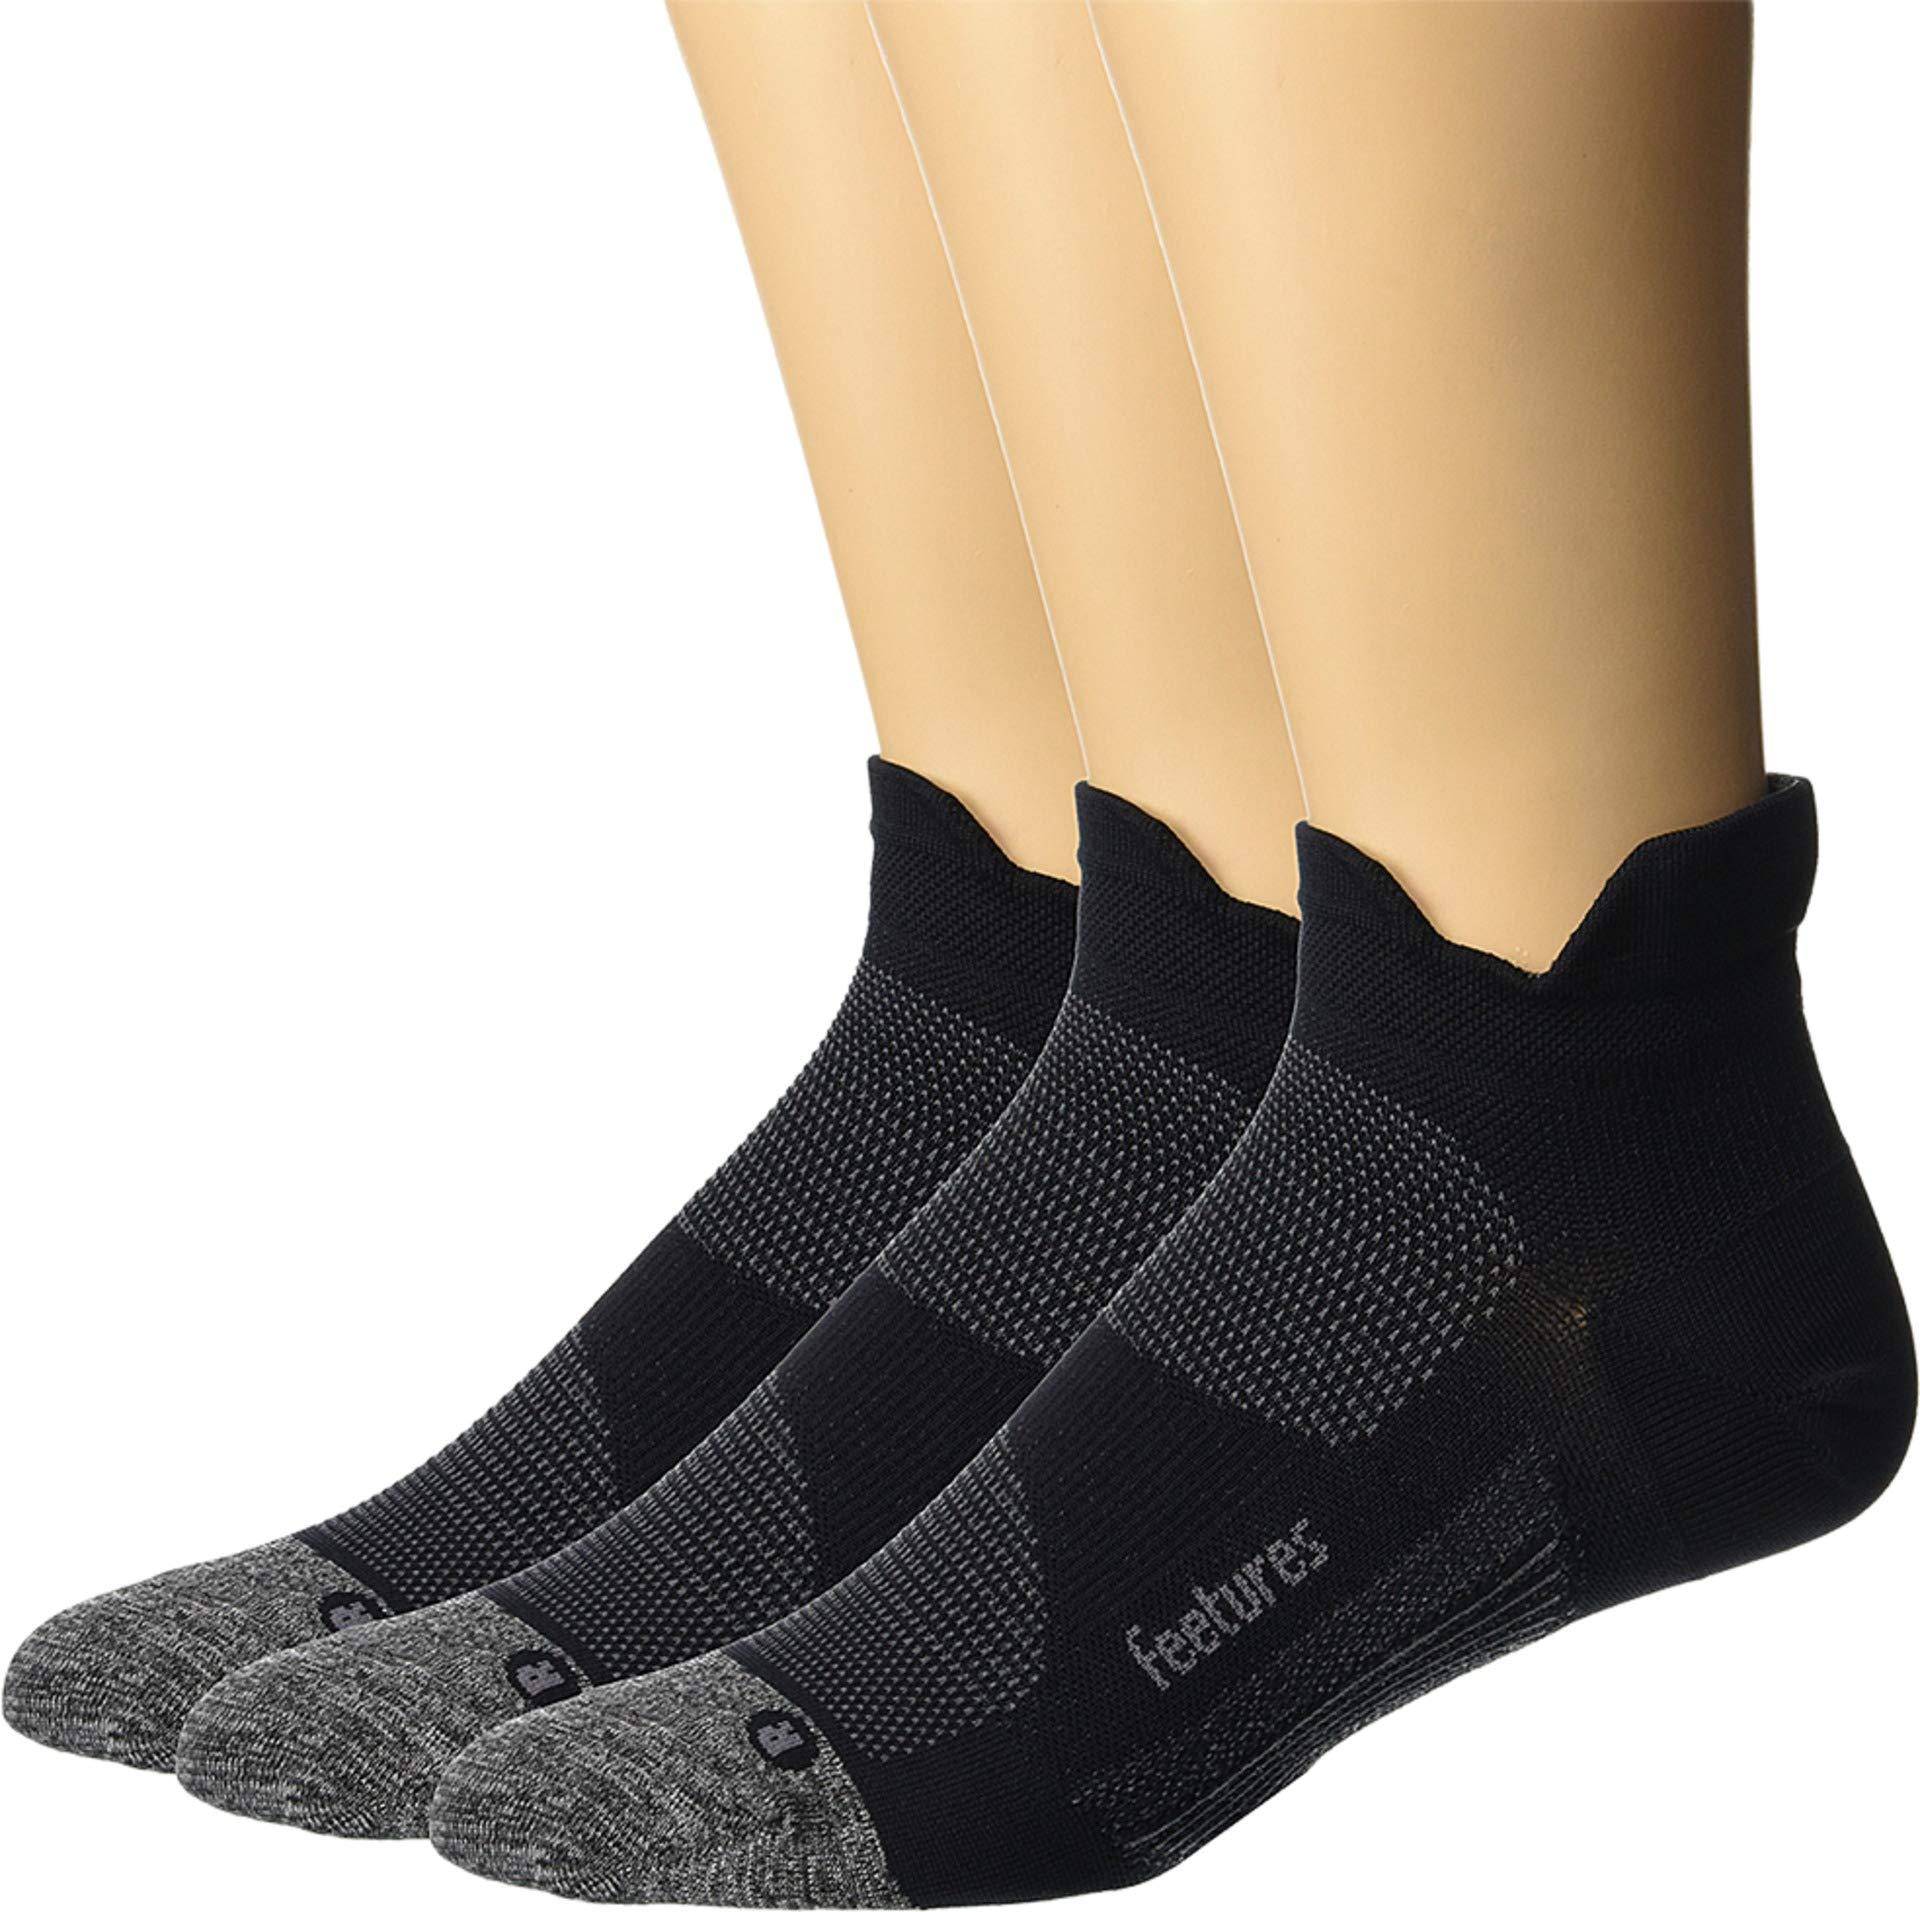 Feetures! Elite Ultra Light No Show Tab 3-pair Pack in Black - Lyst